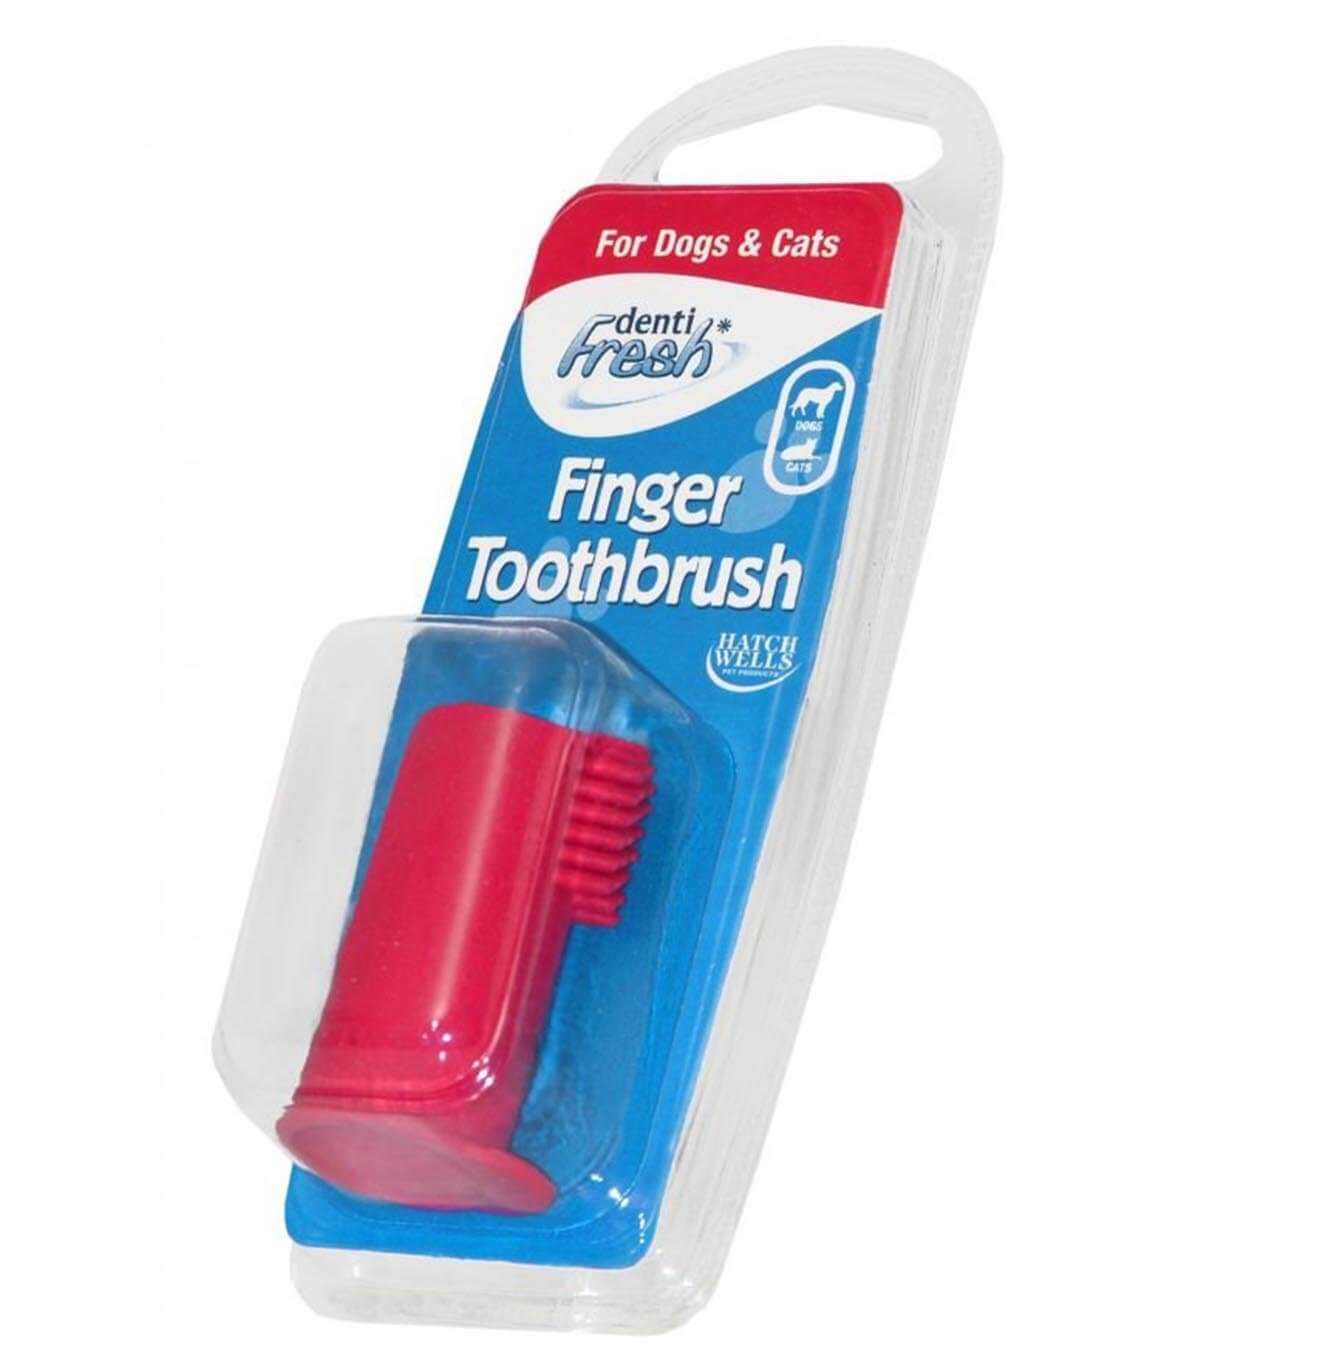 Hatchwell Dog and Cat Finger Toothbrush